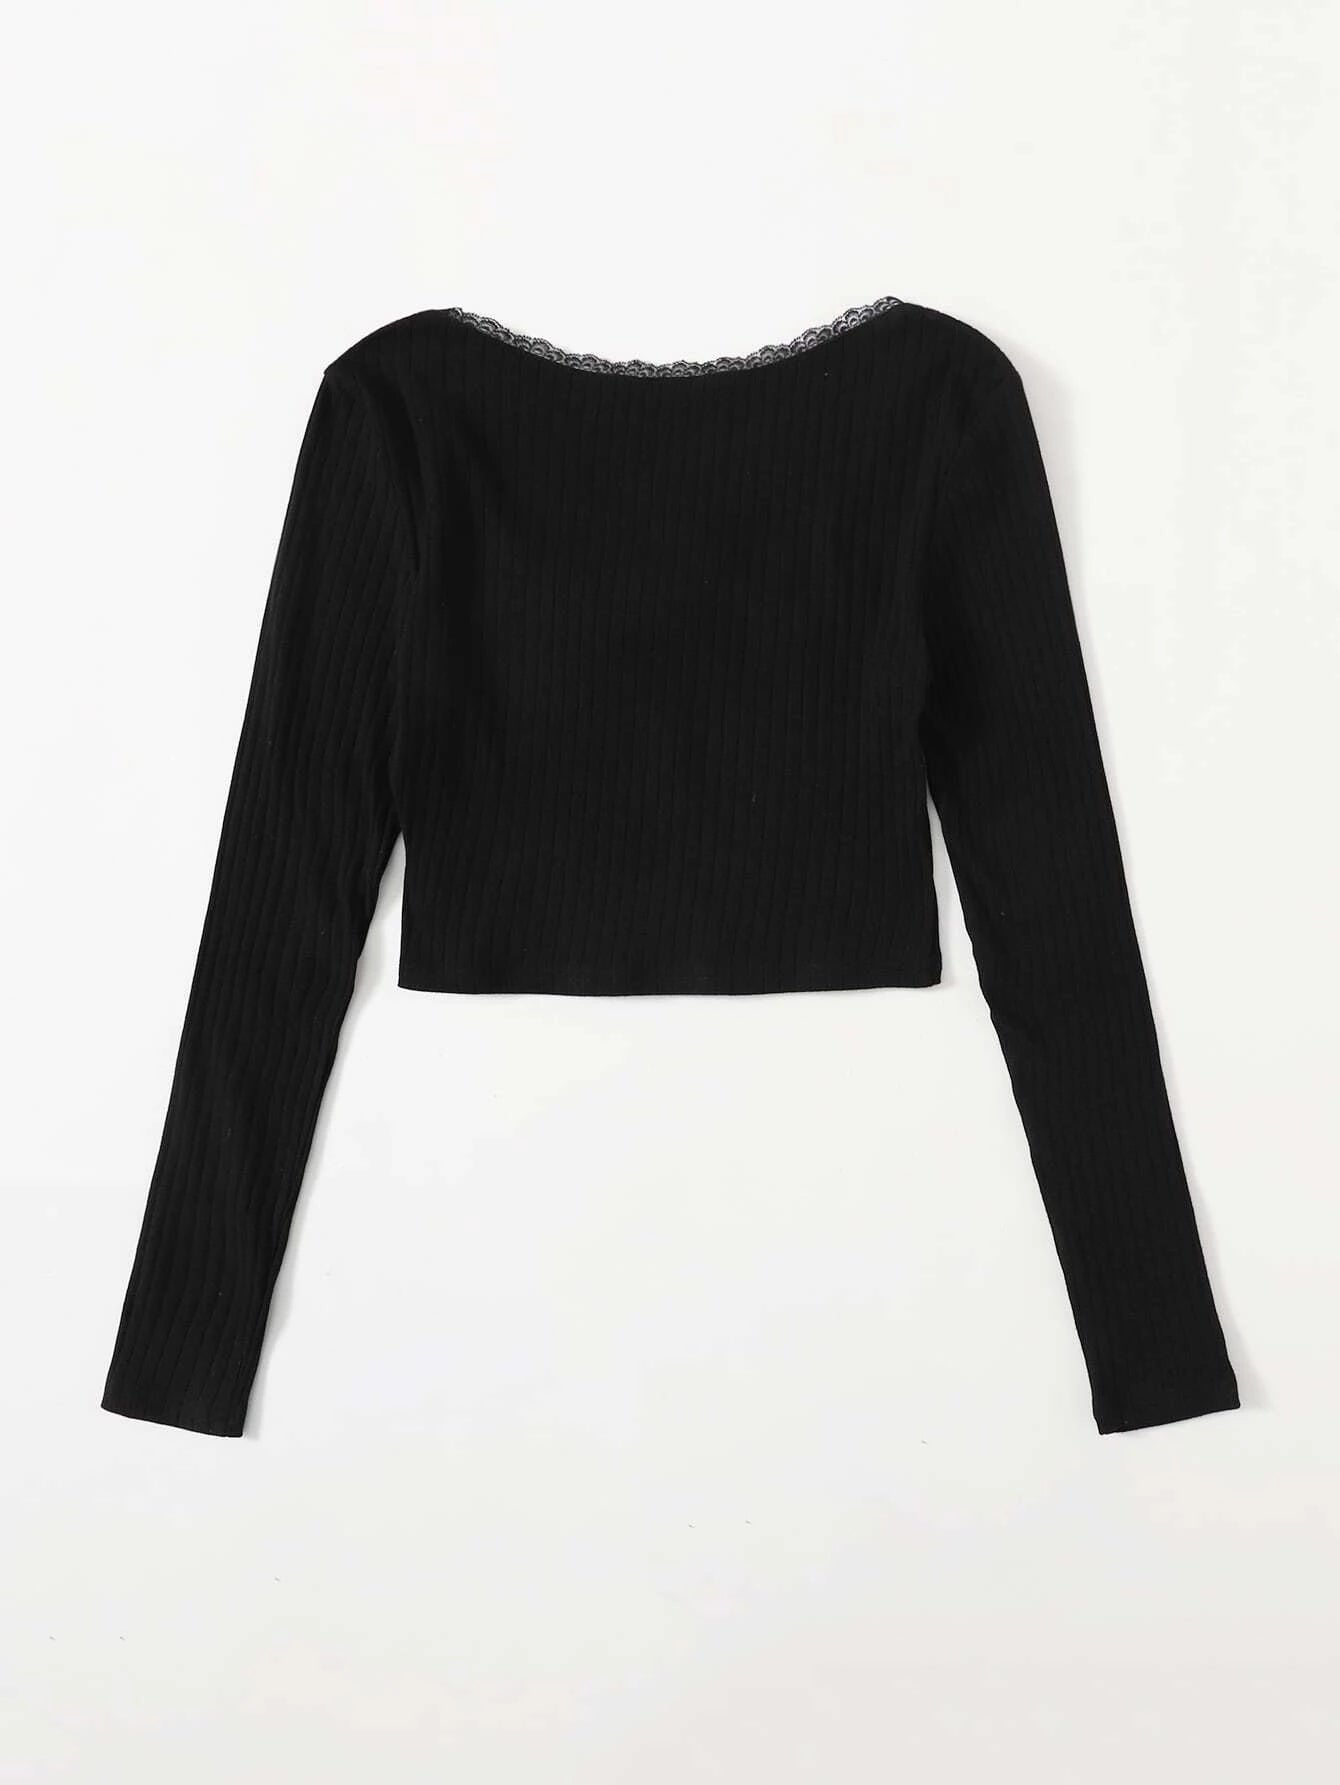 Lace Trim Bow Front Rib-knit Tee